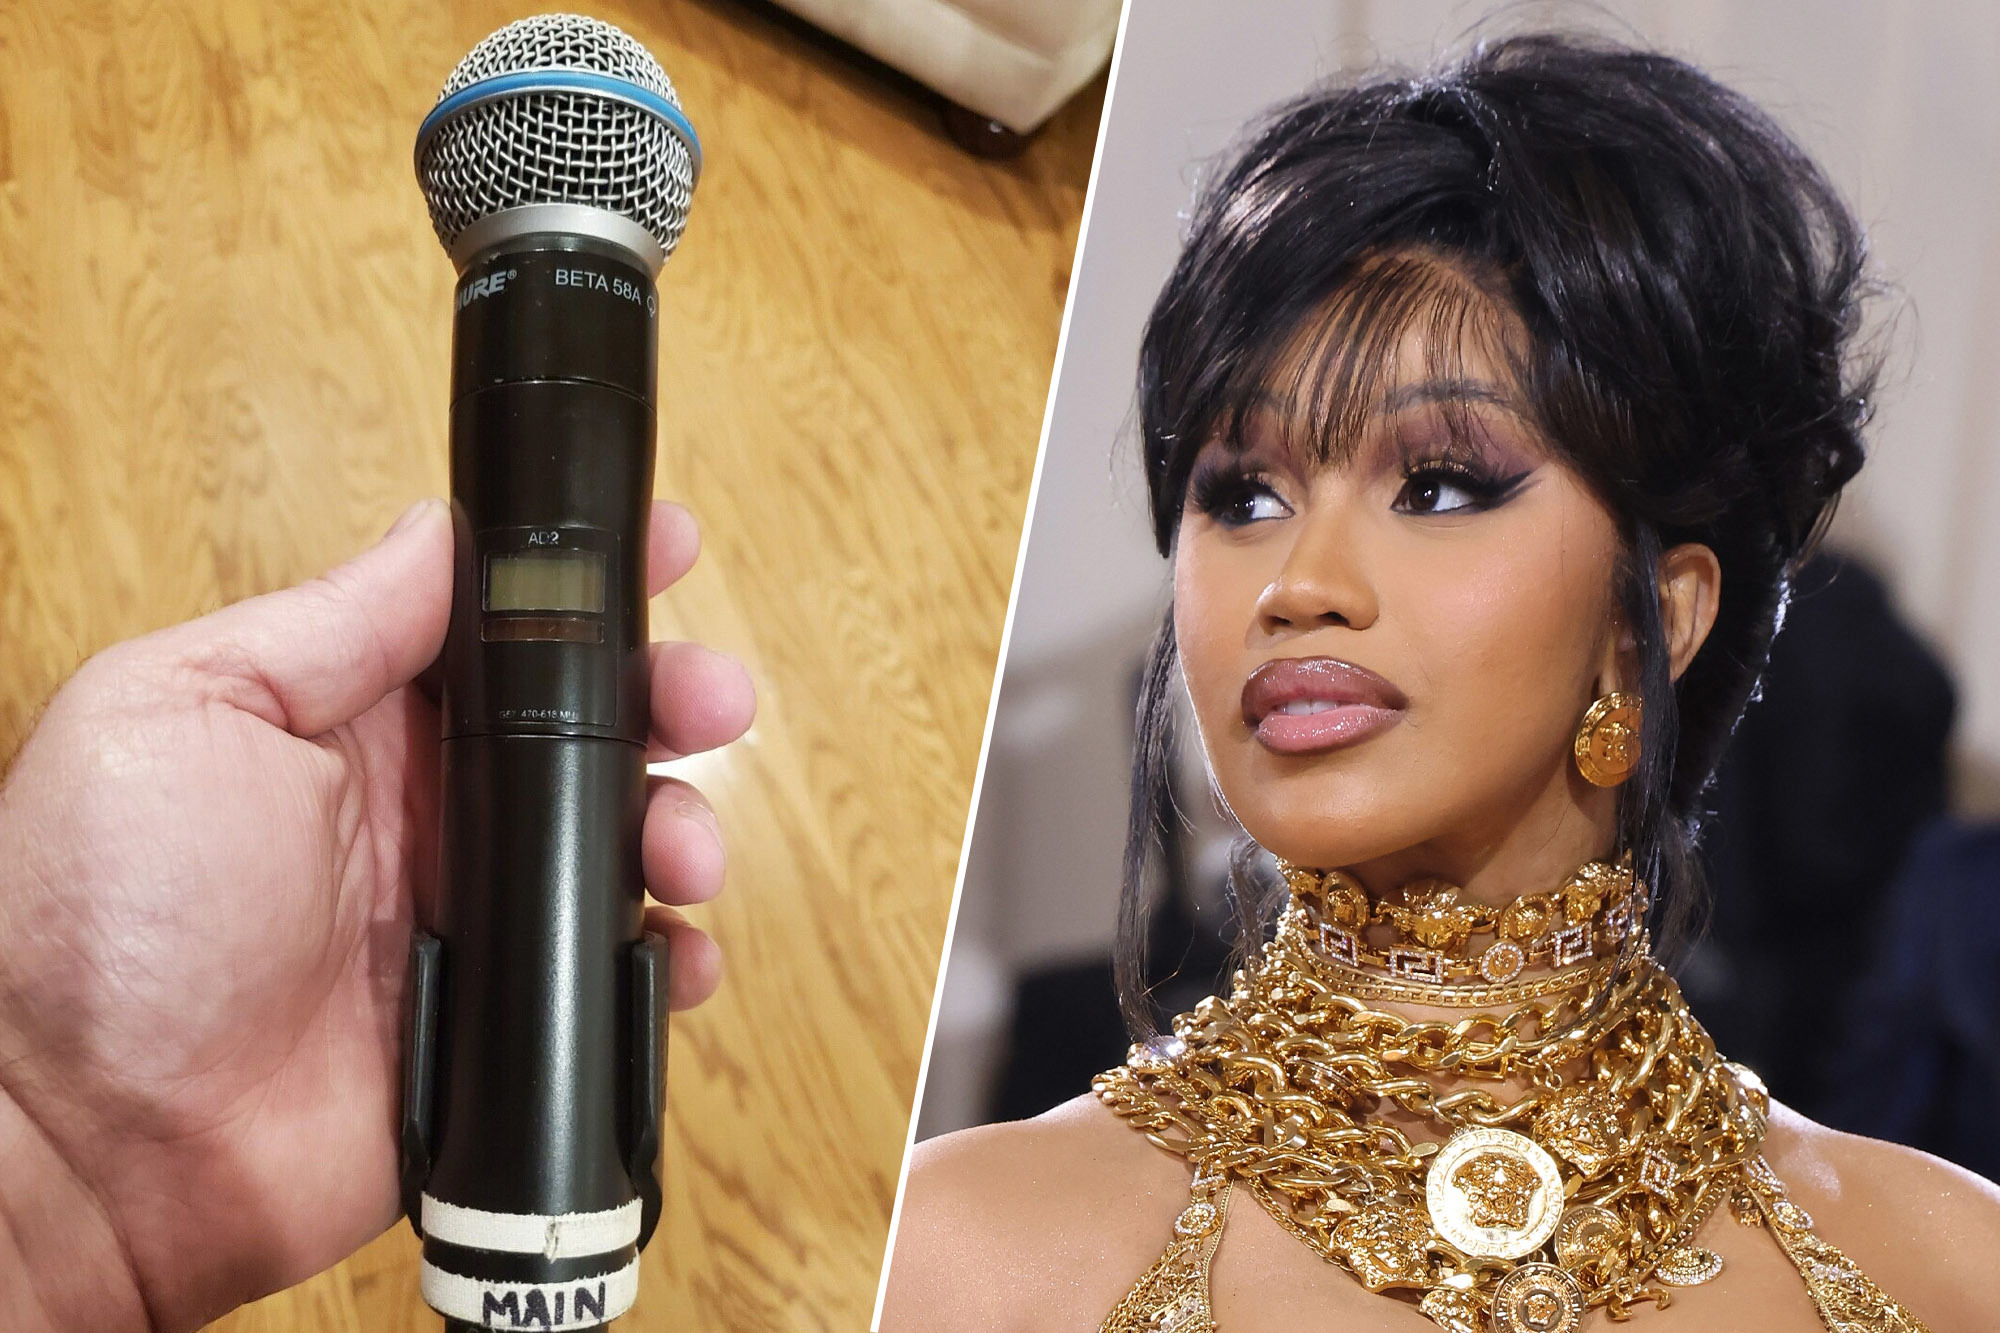 cardi-b-s-thrown-microphone-sells-for-nearly-100-000